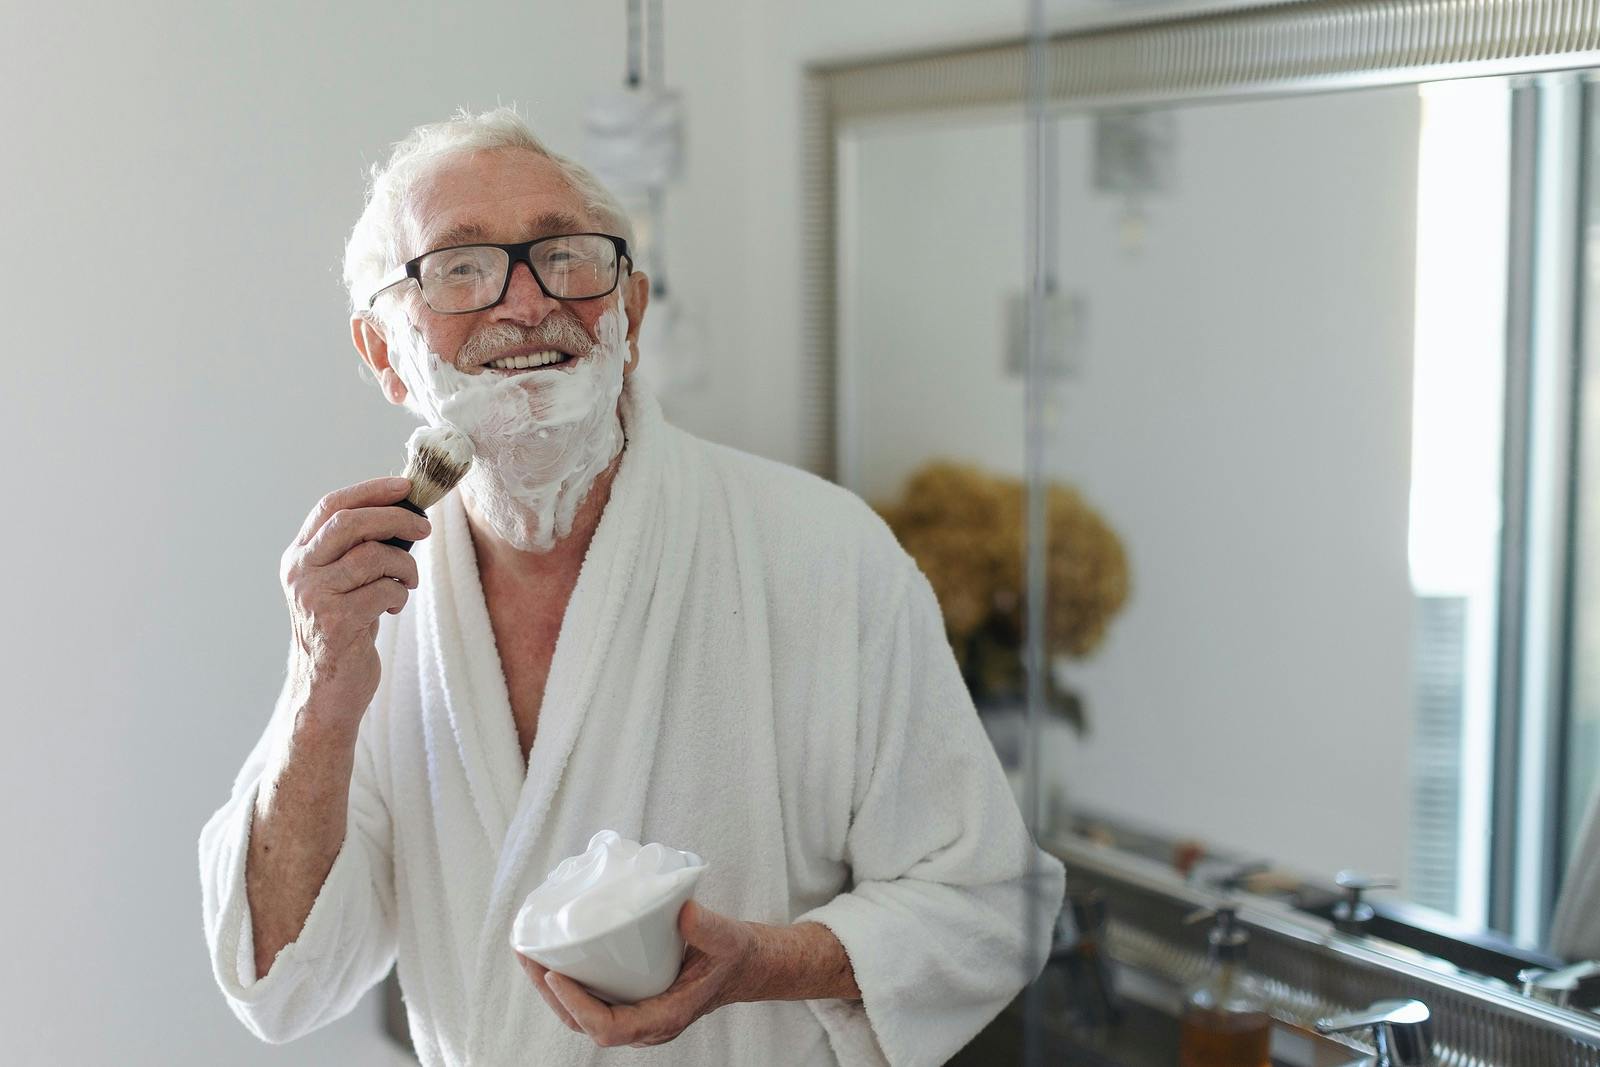 Senior man shaving his beard in the bathroom, looking at camera. Morning routine concept.
